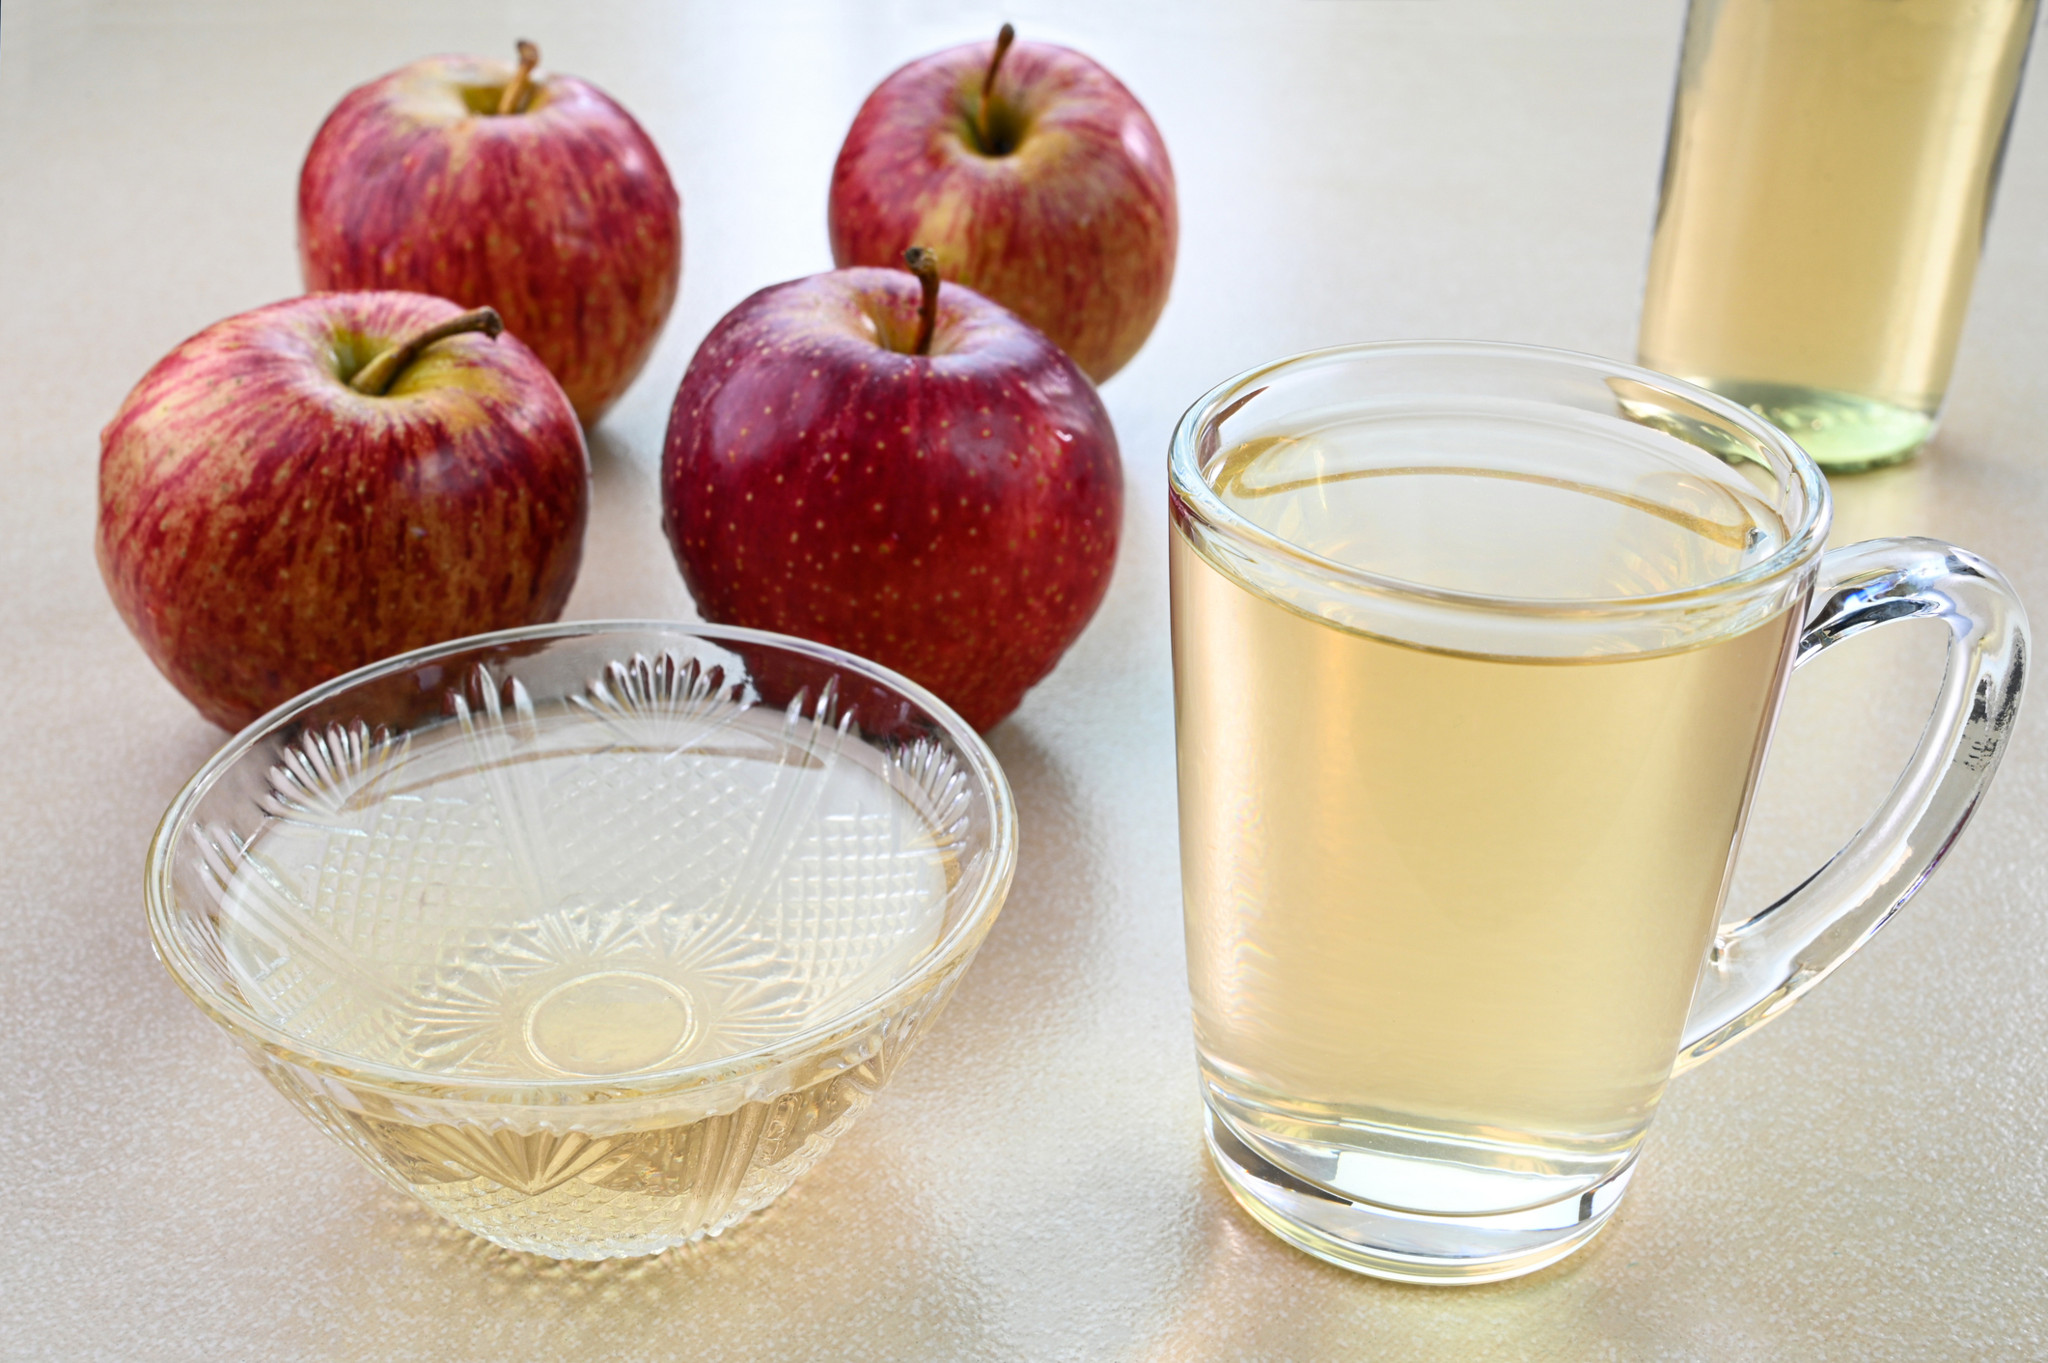 Apple cider vinegar in a glass cup and apples in the background.